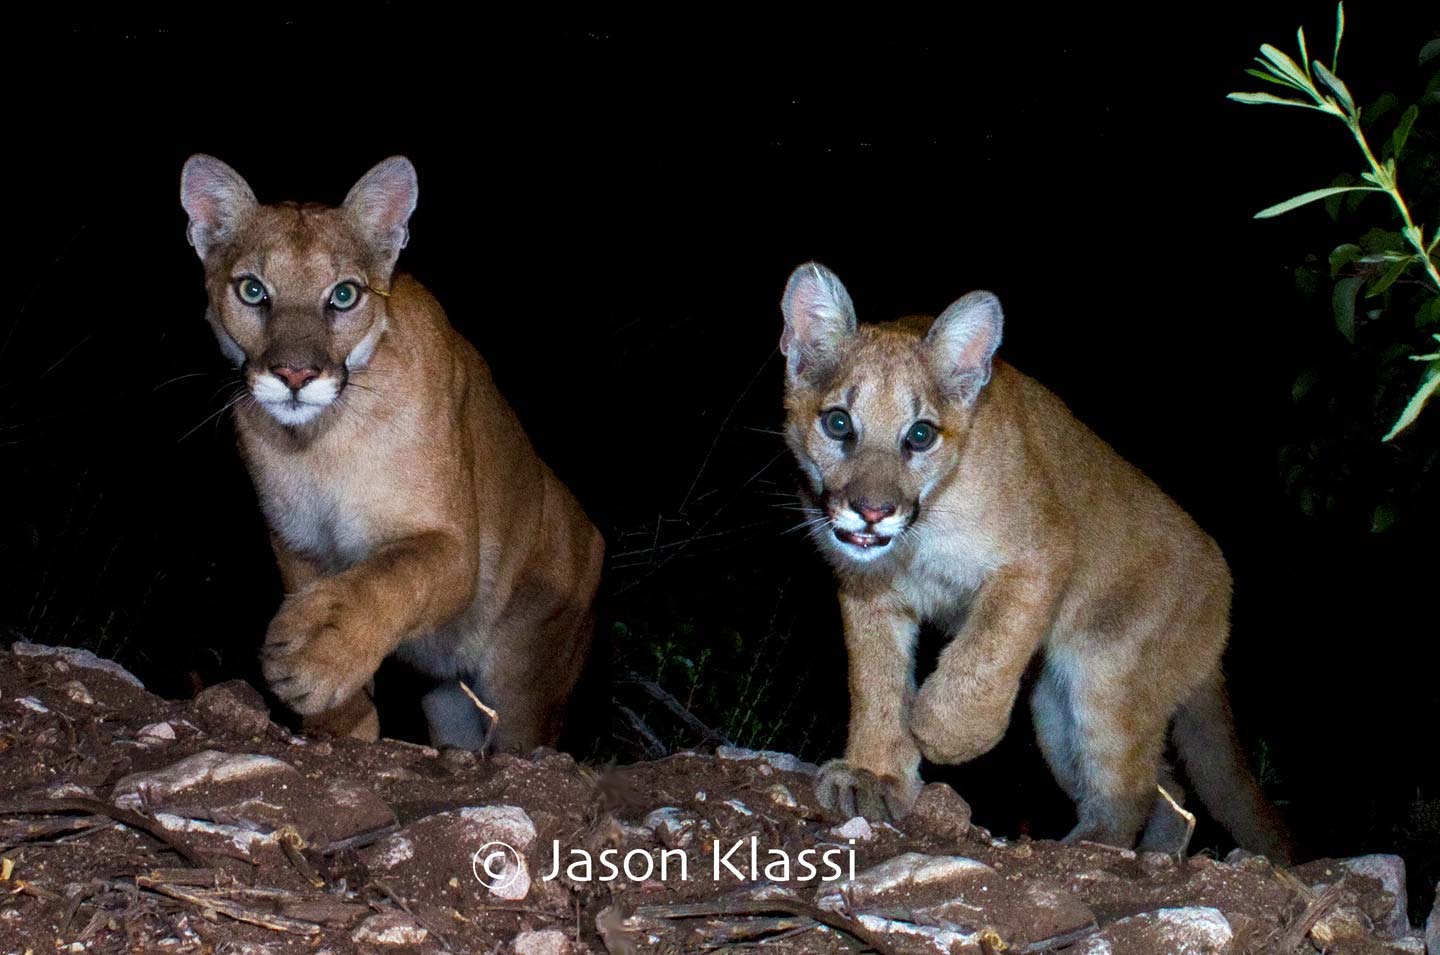 Here is a composite image of 2 cougars who passed by my trail cam recently. I’ve nicknamed them "Chippewa" and "Yoda".